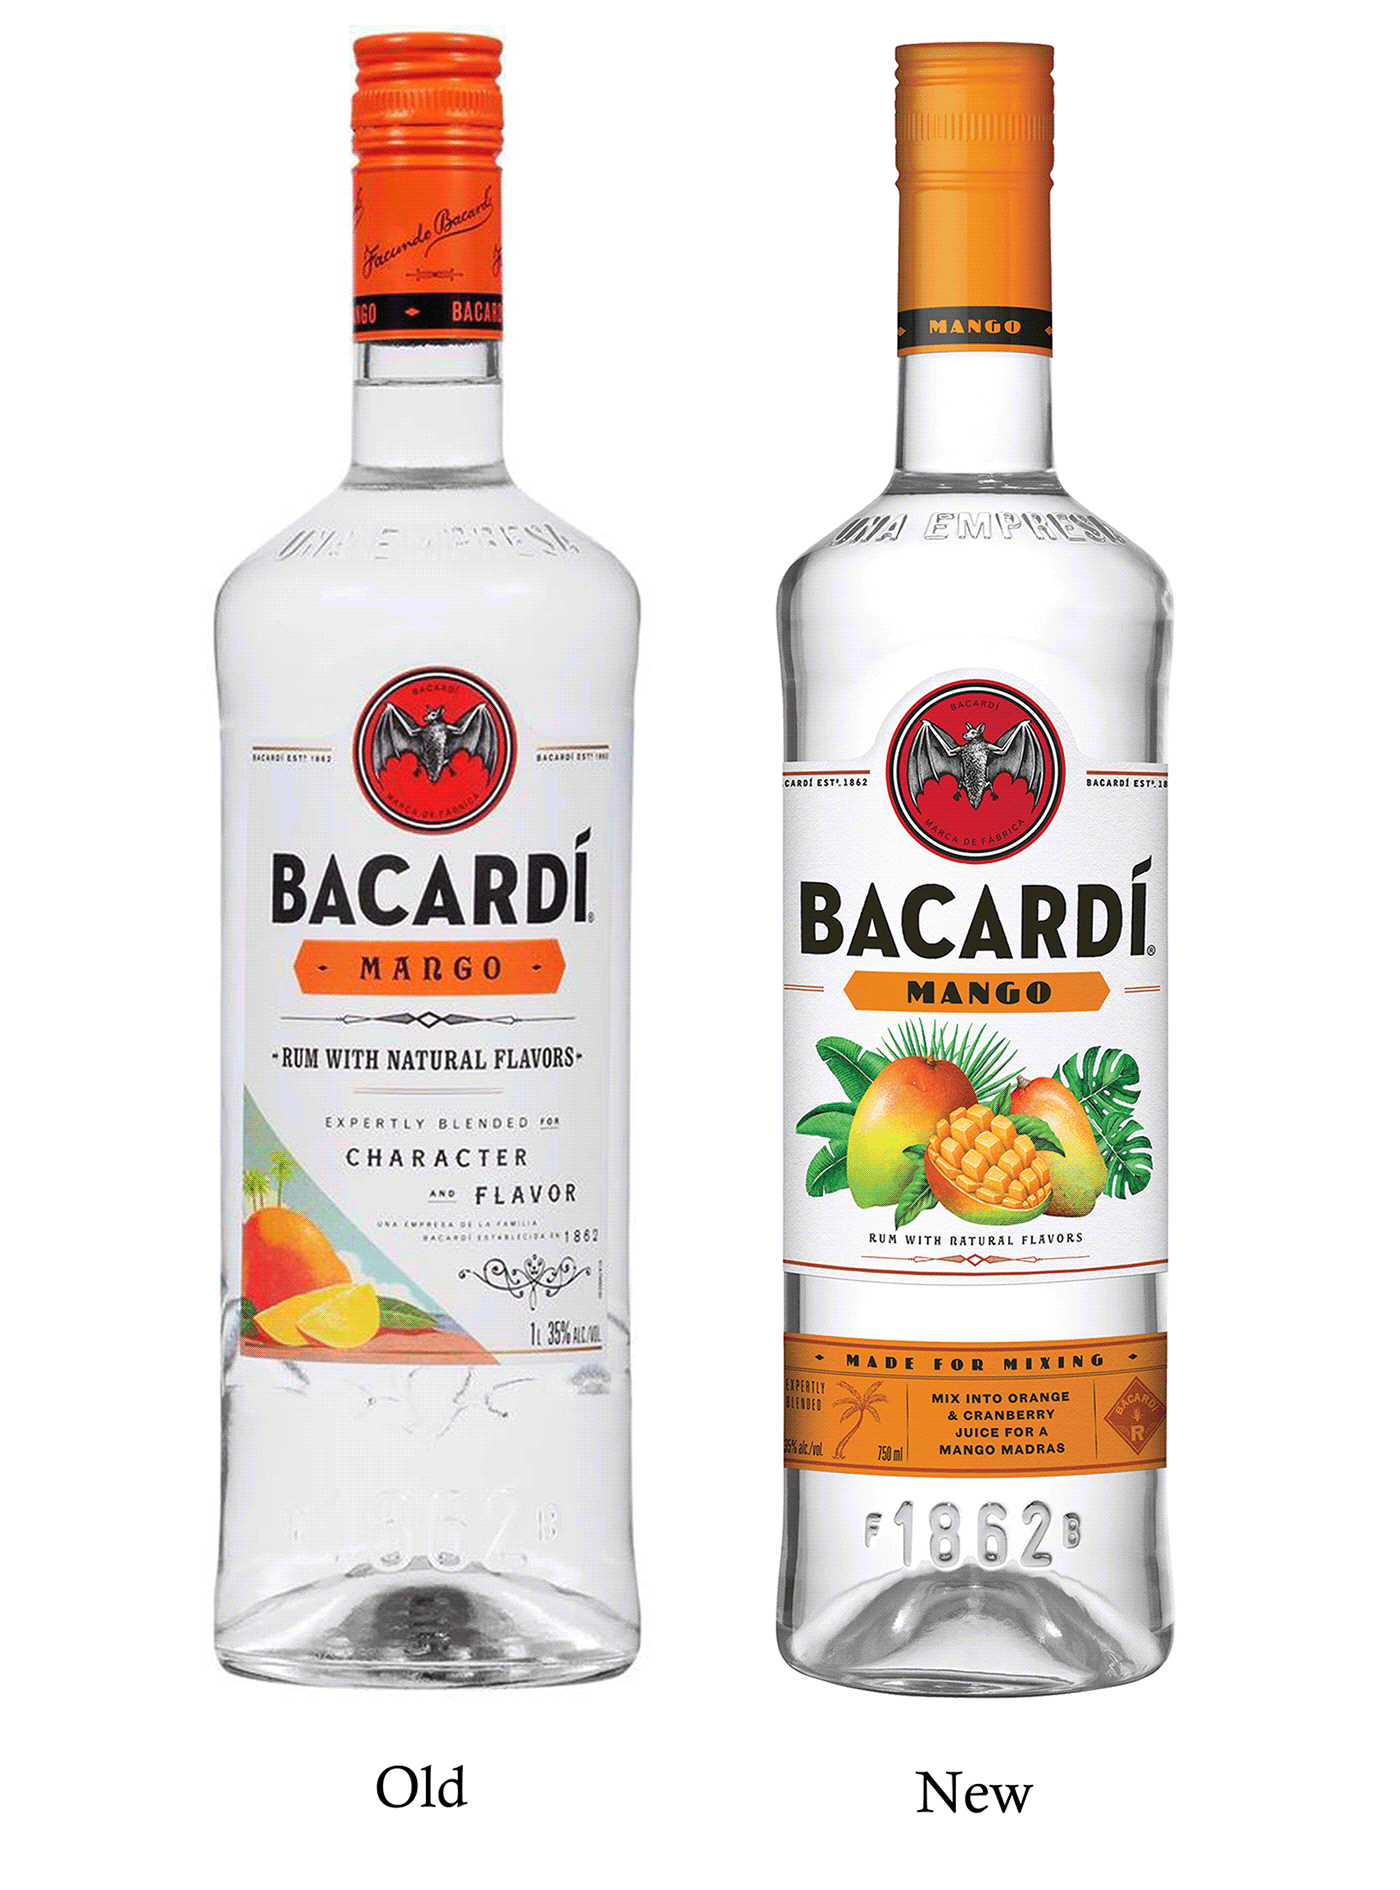 Old and new bottles of Bacardi Mango Rum.